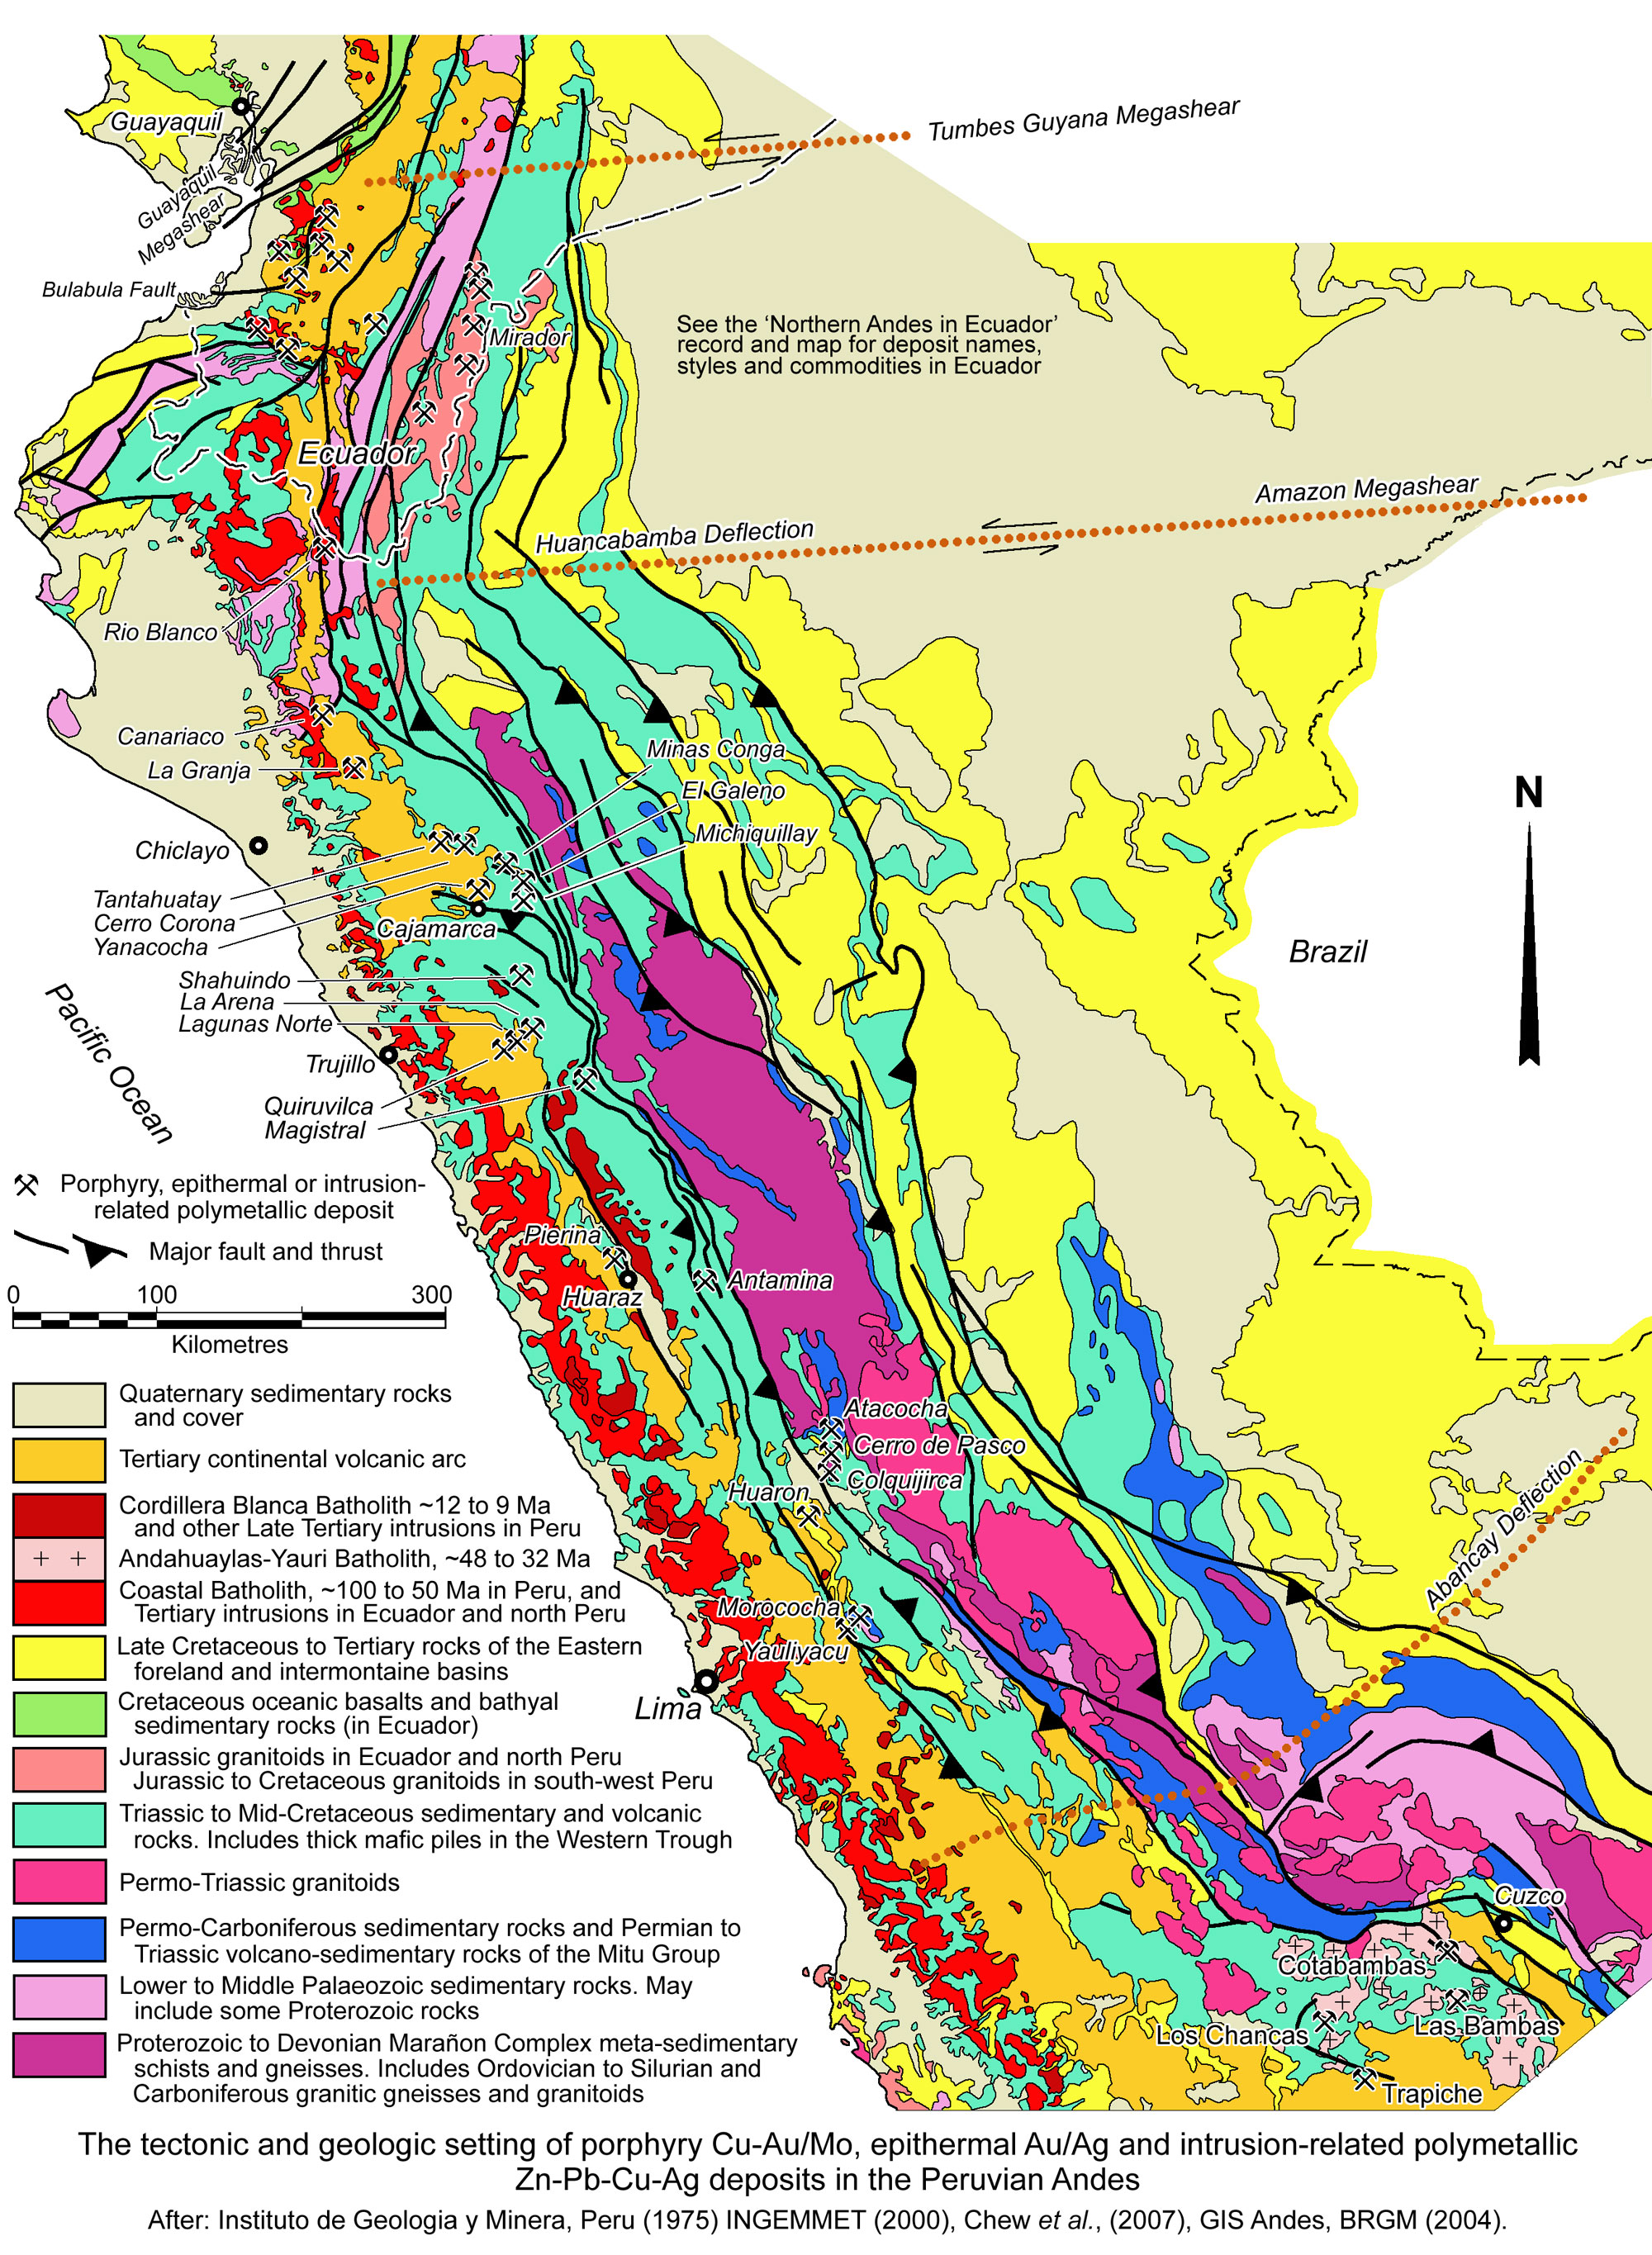 Peruvian Andes geology